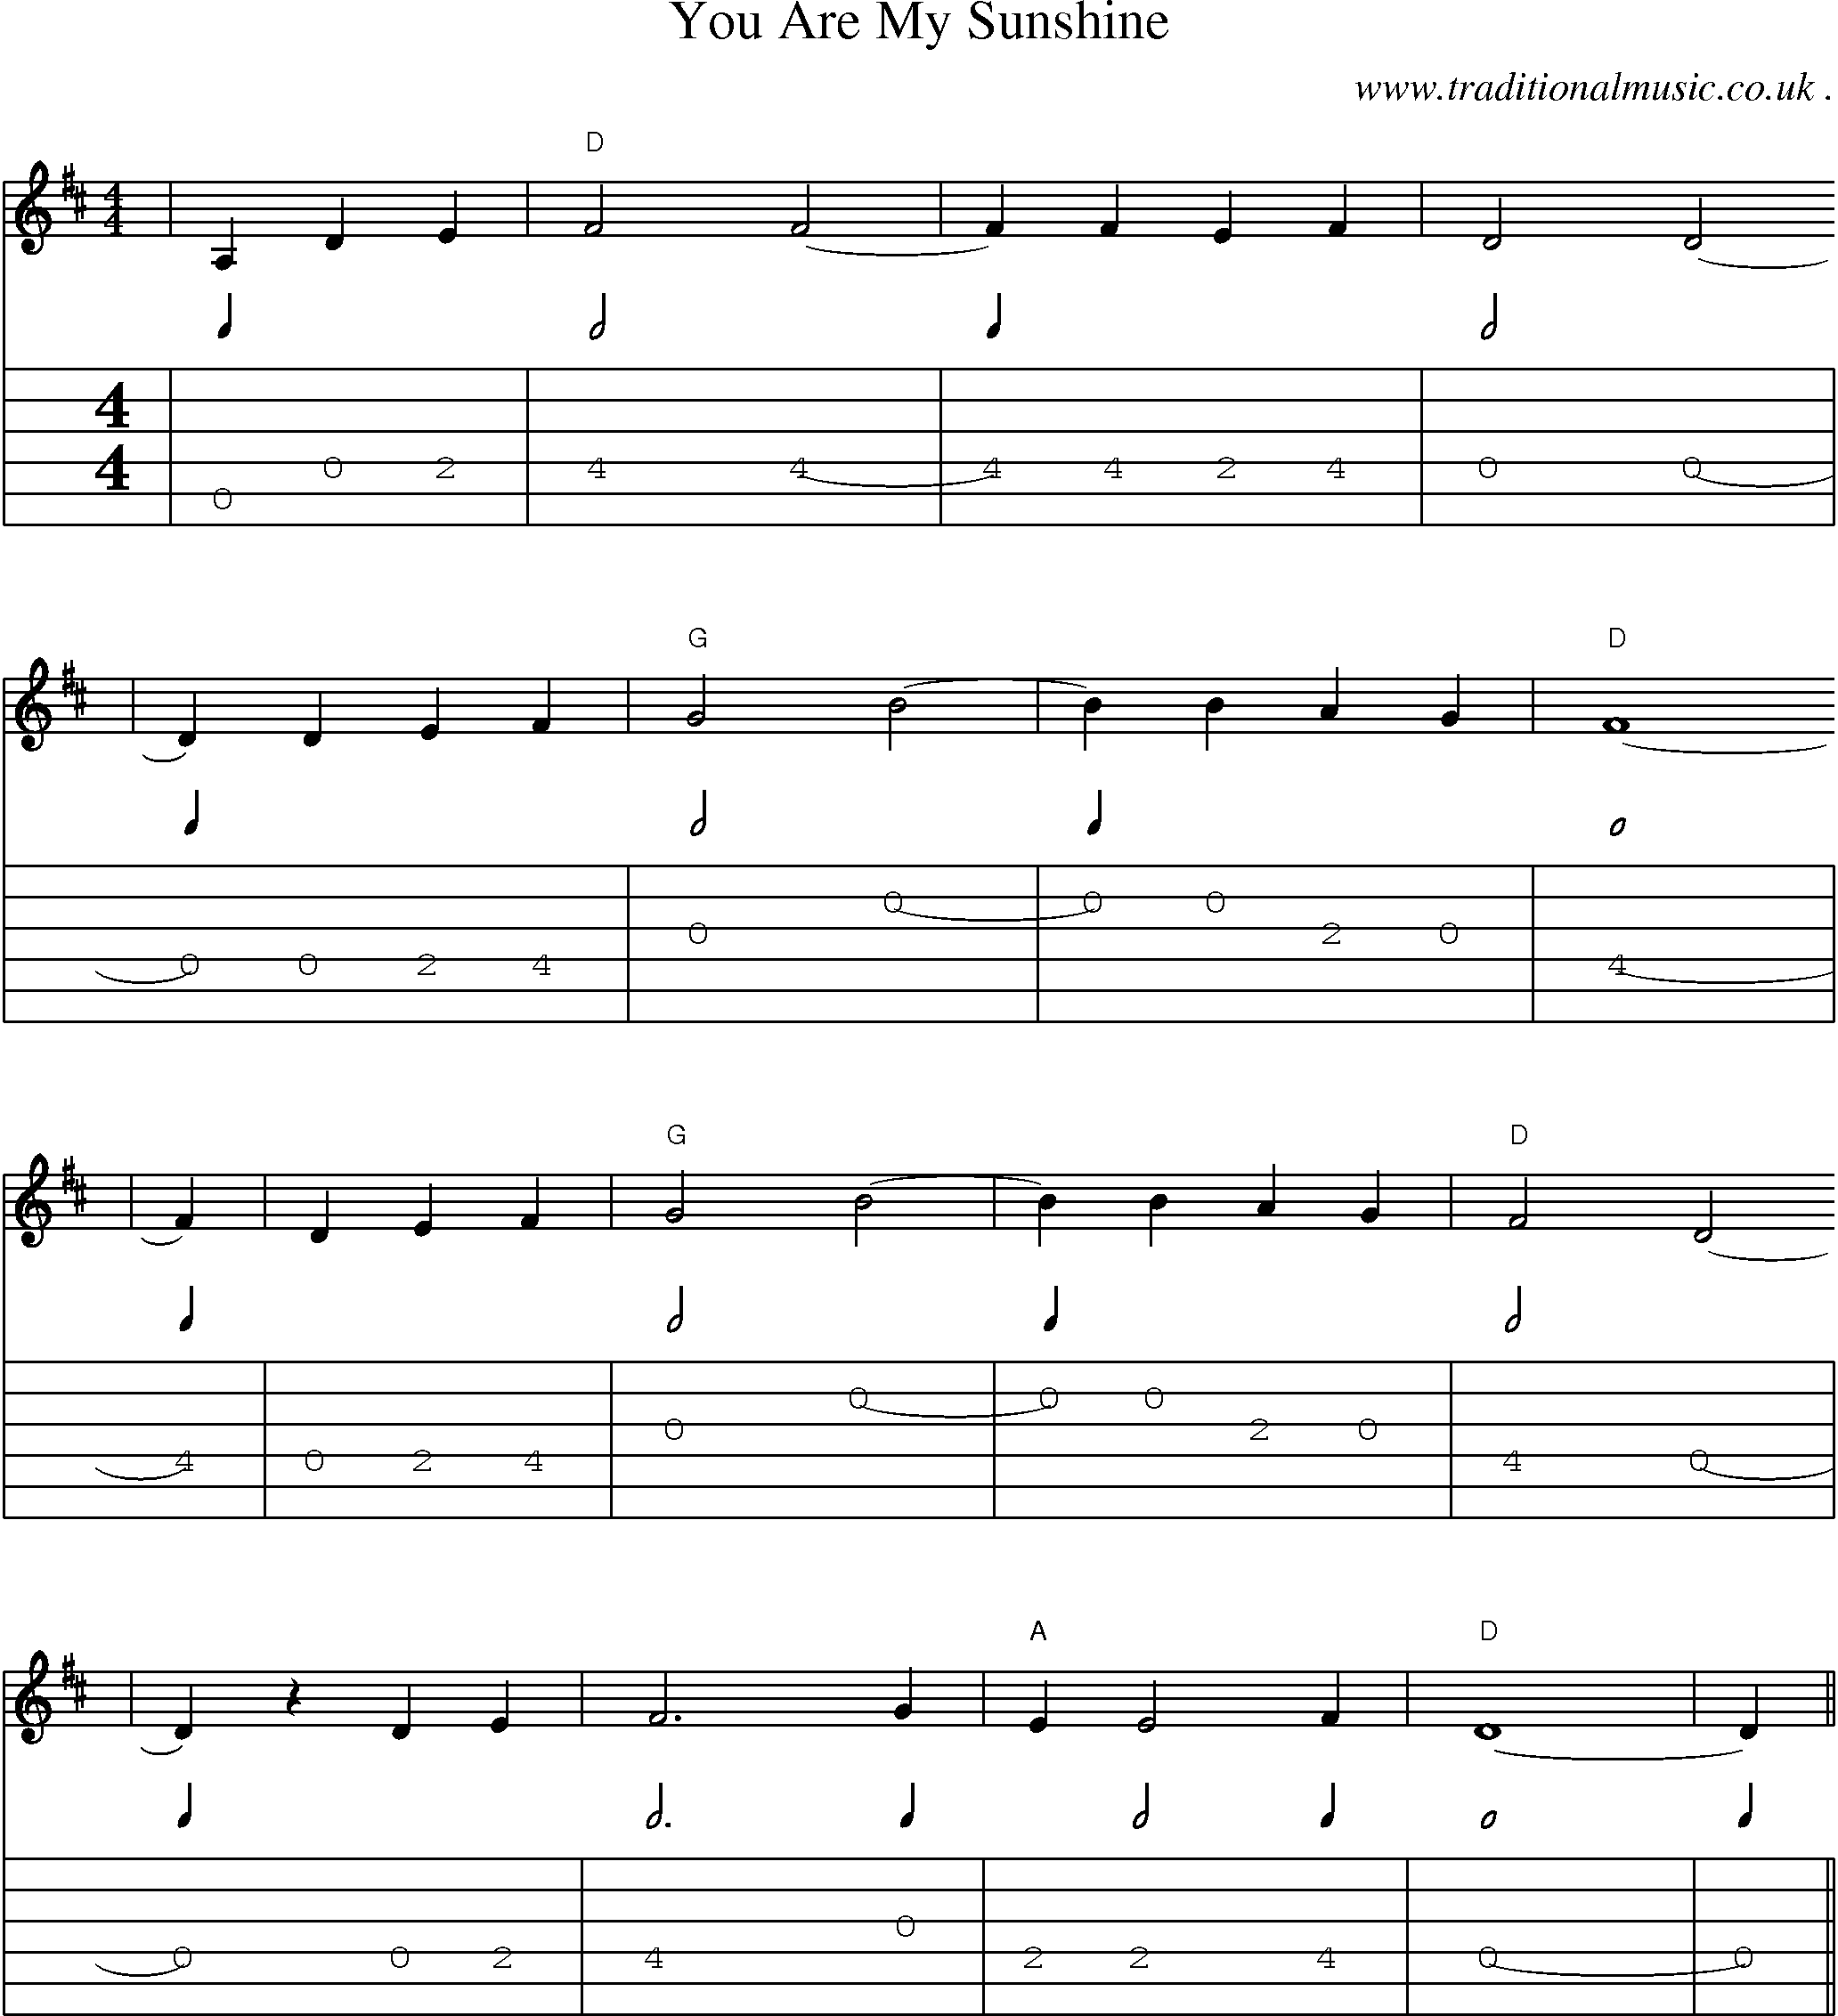 Music Score and Guitar Tabs for You Are My Sunshine